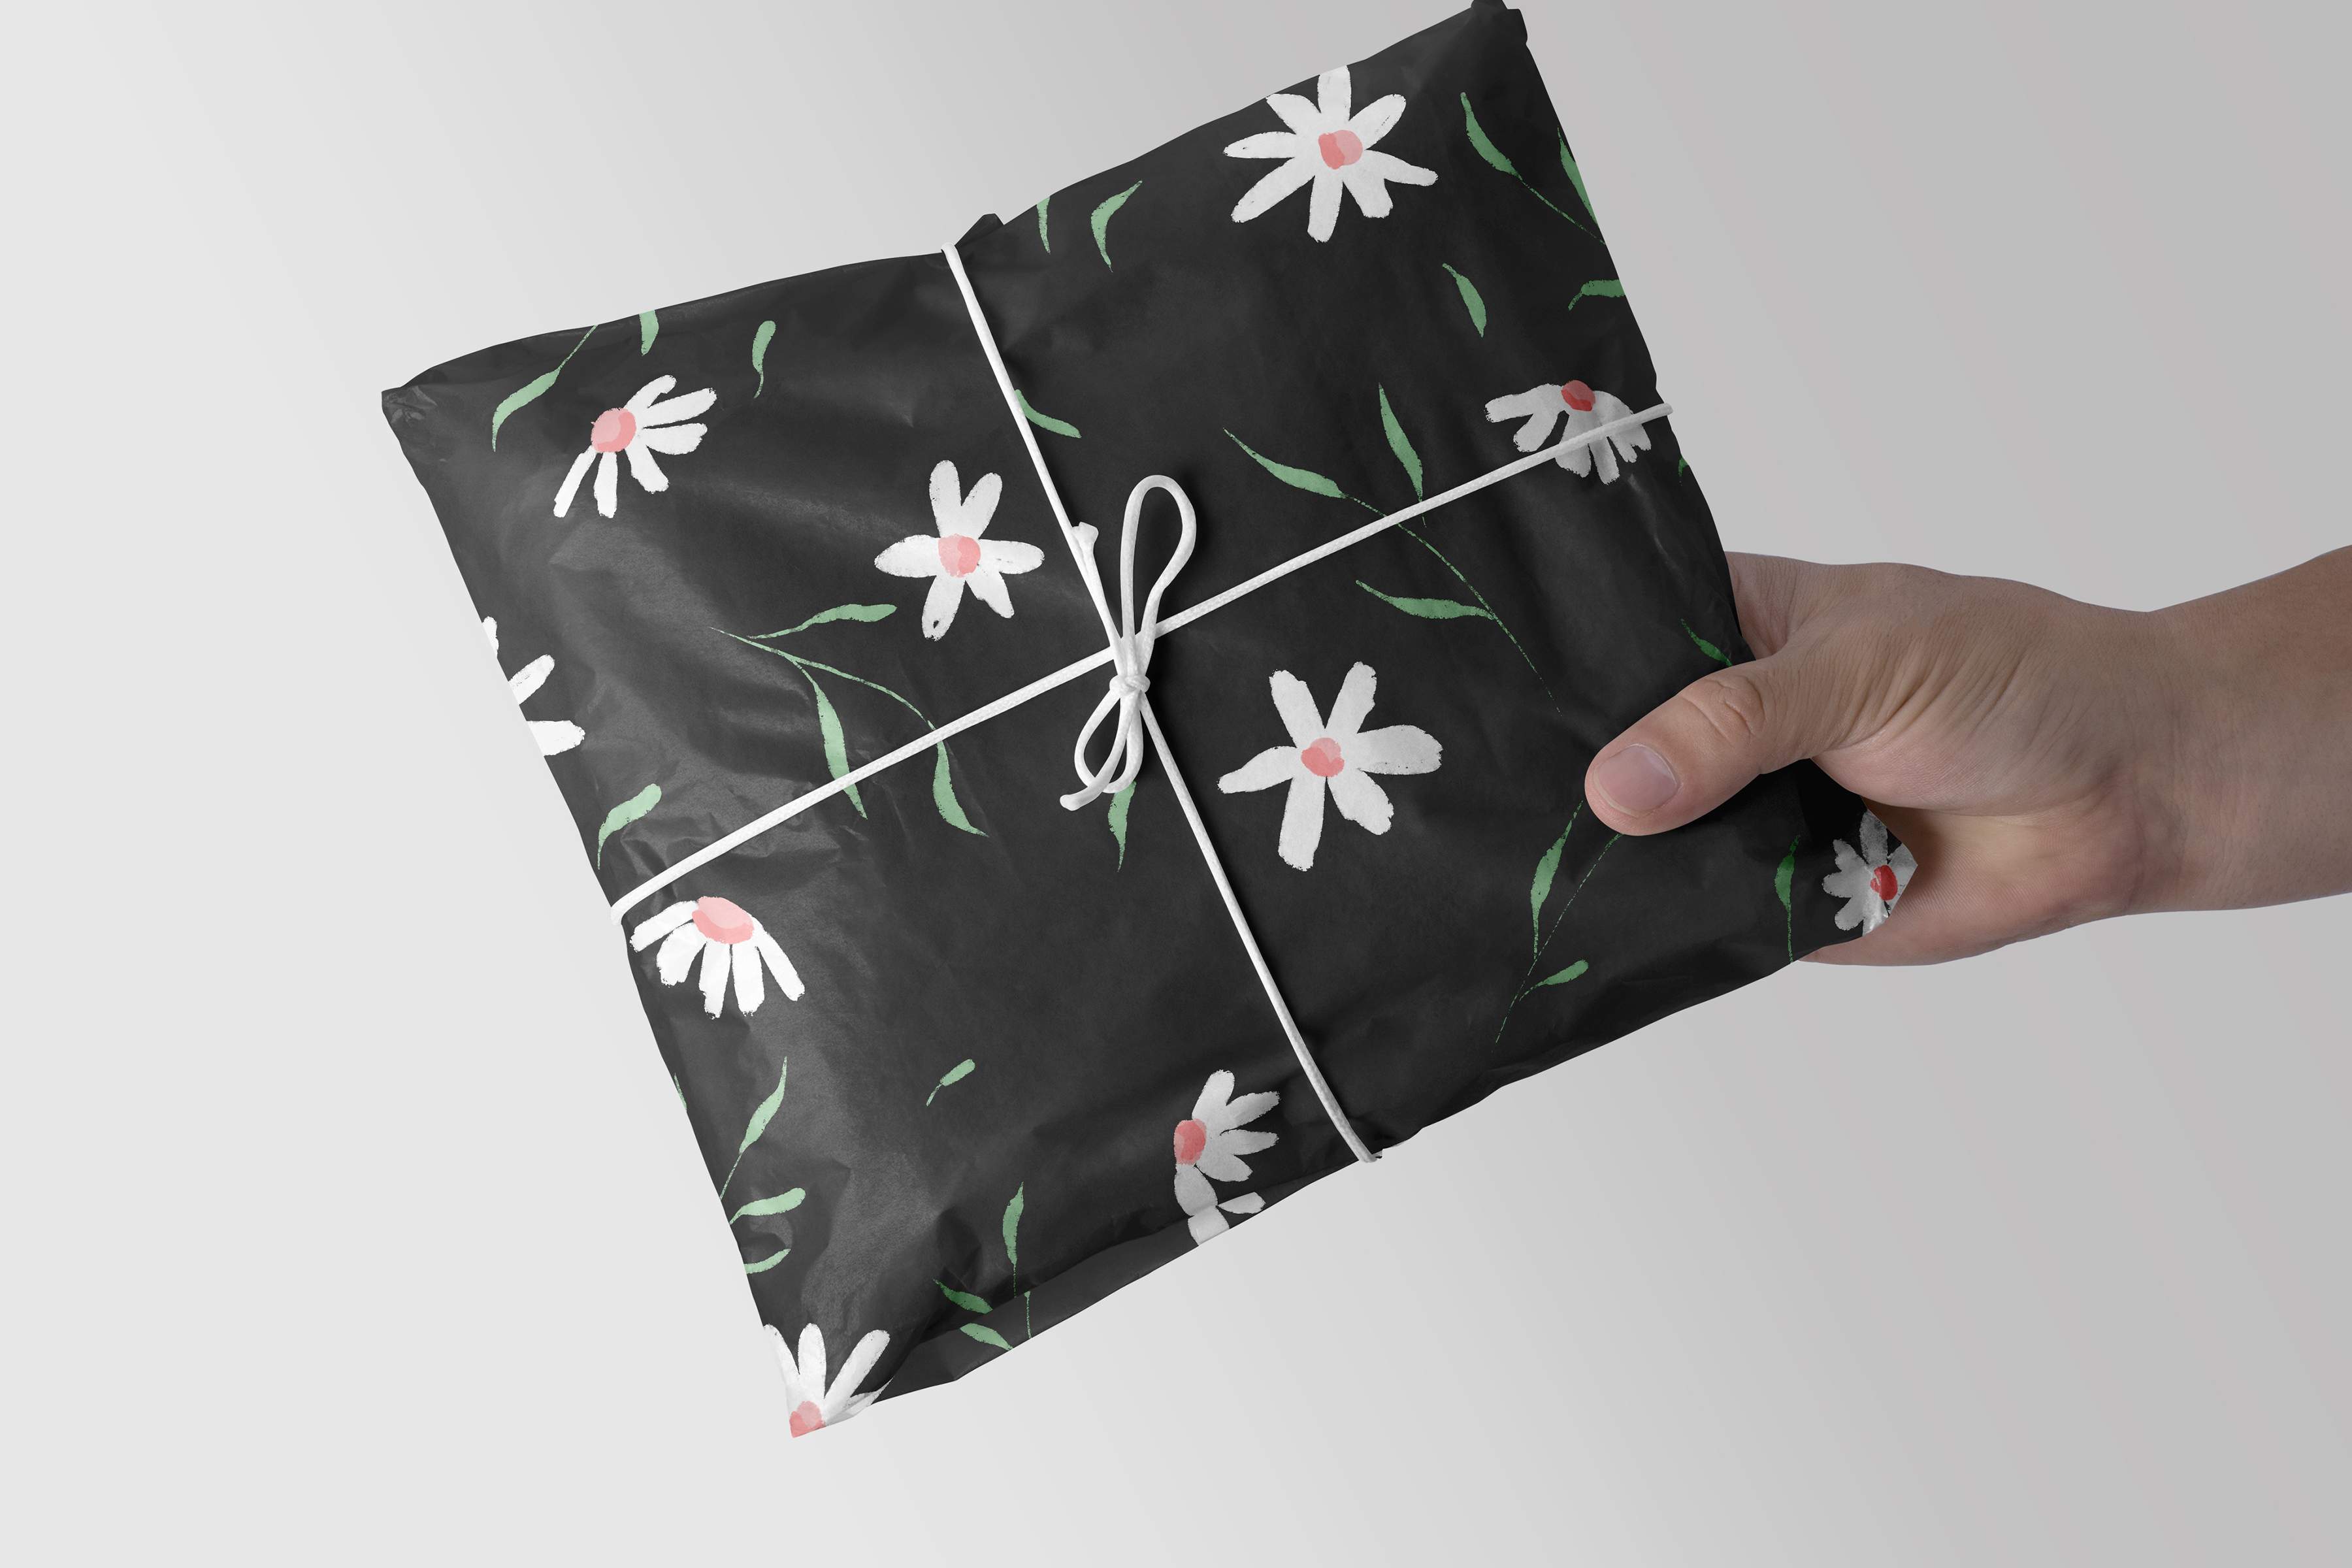 Hand is holding a black wrapping paper with white and pink flowers on it.